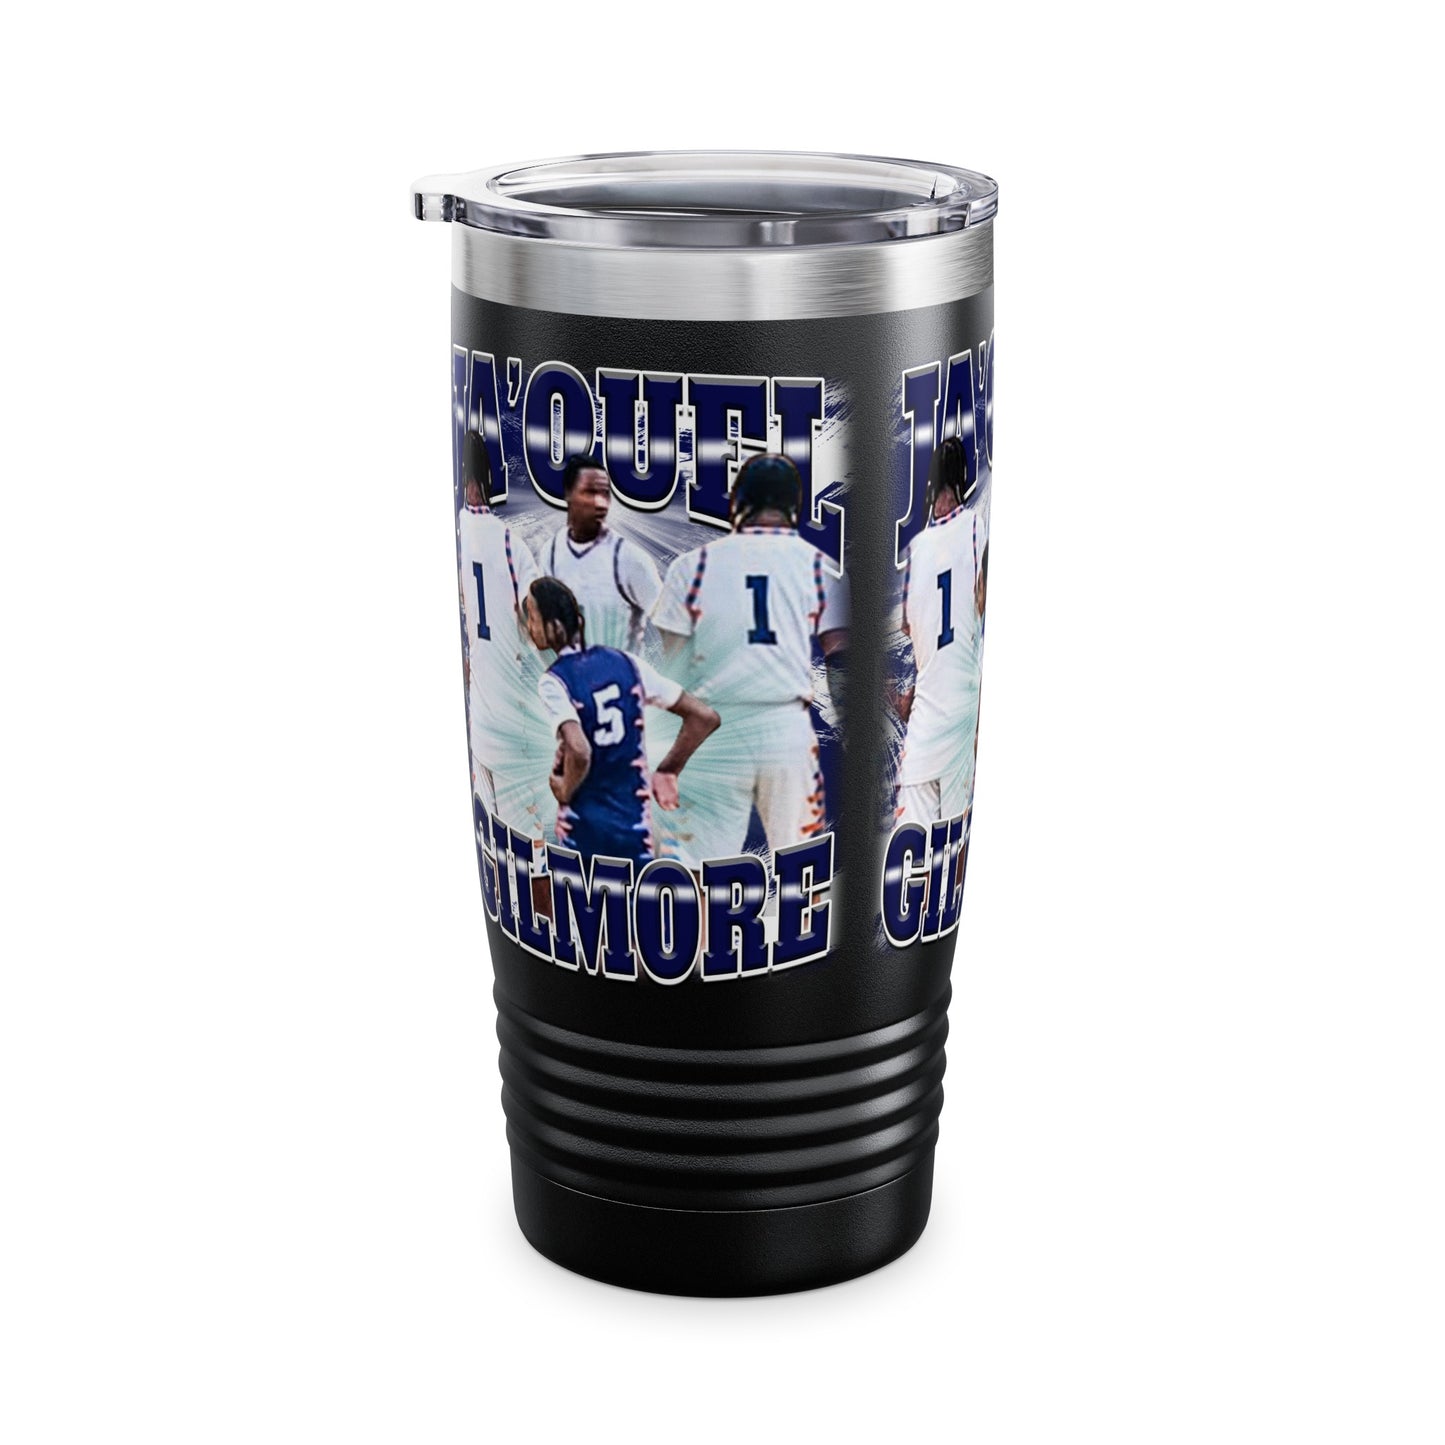 Ja'Quel Gilmore Stainless Steal Tumbler